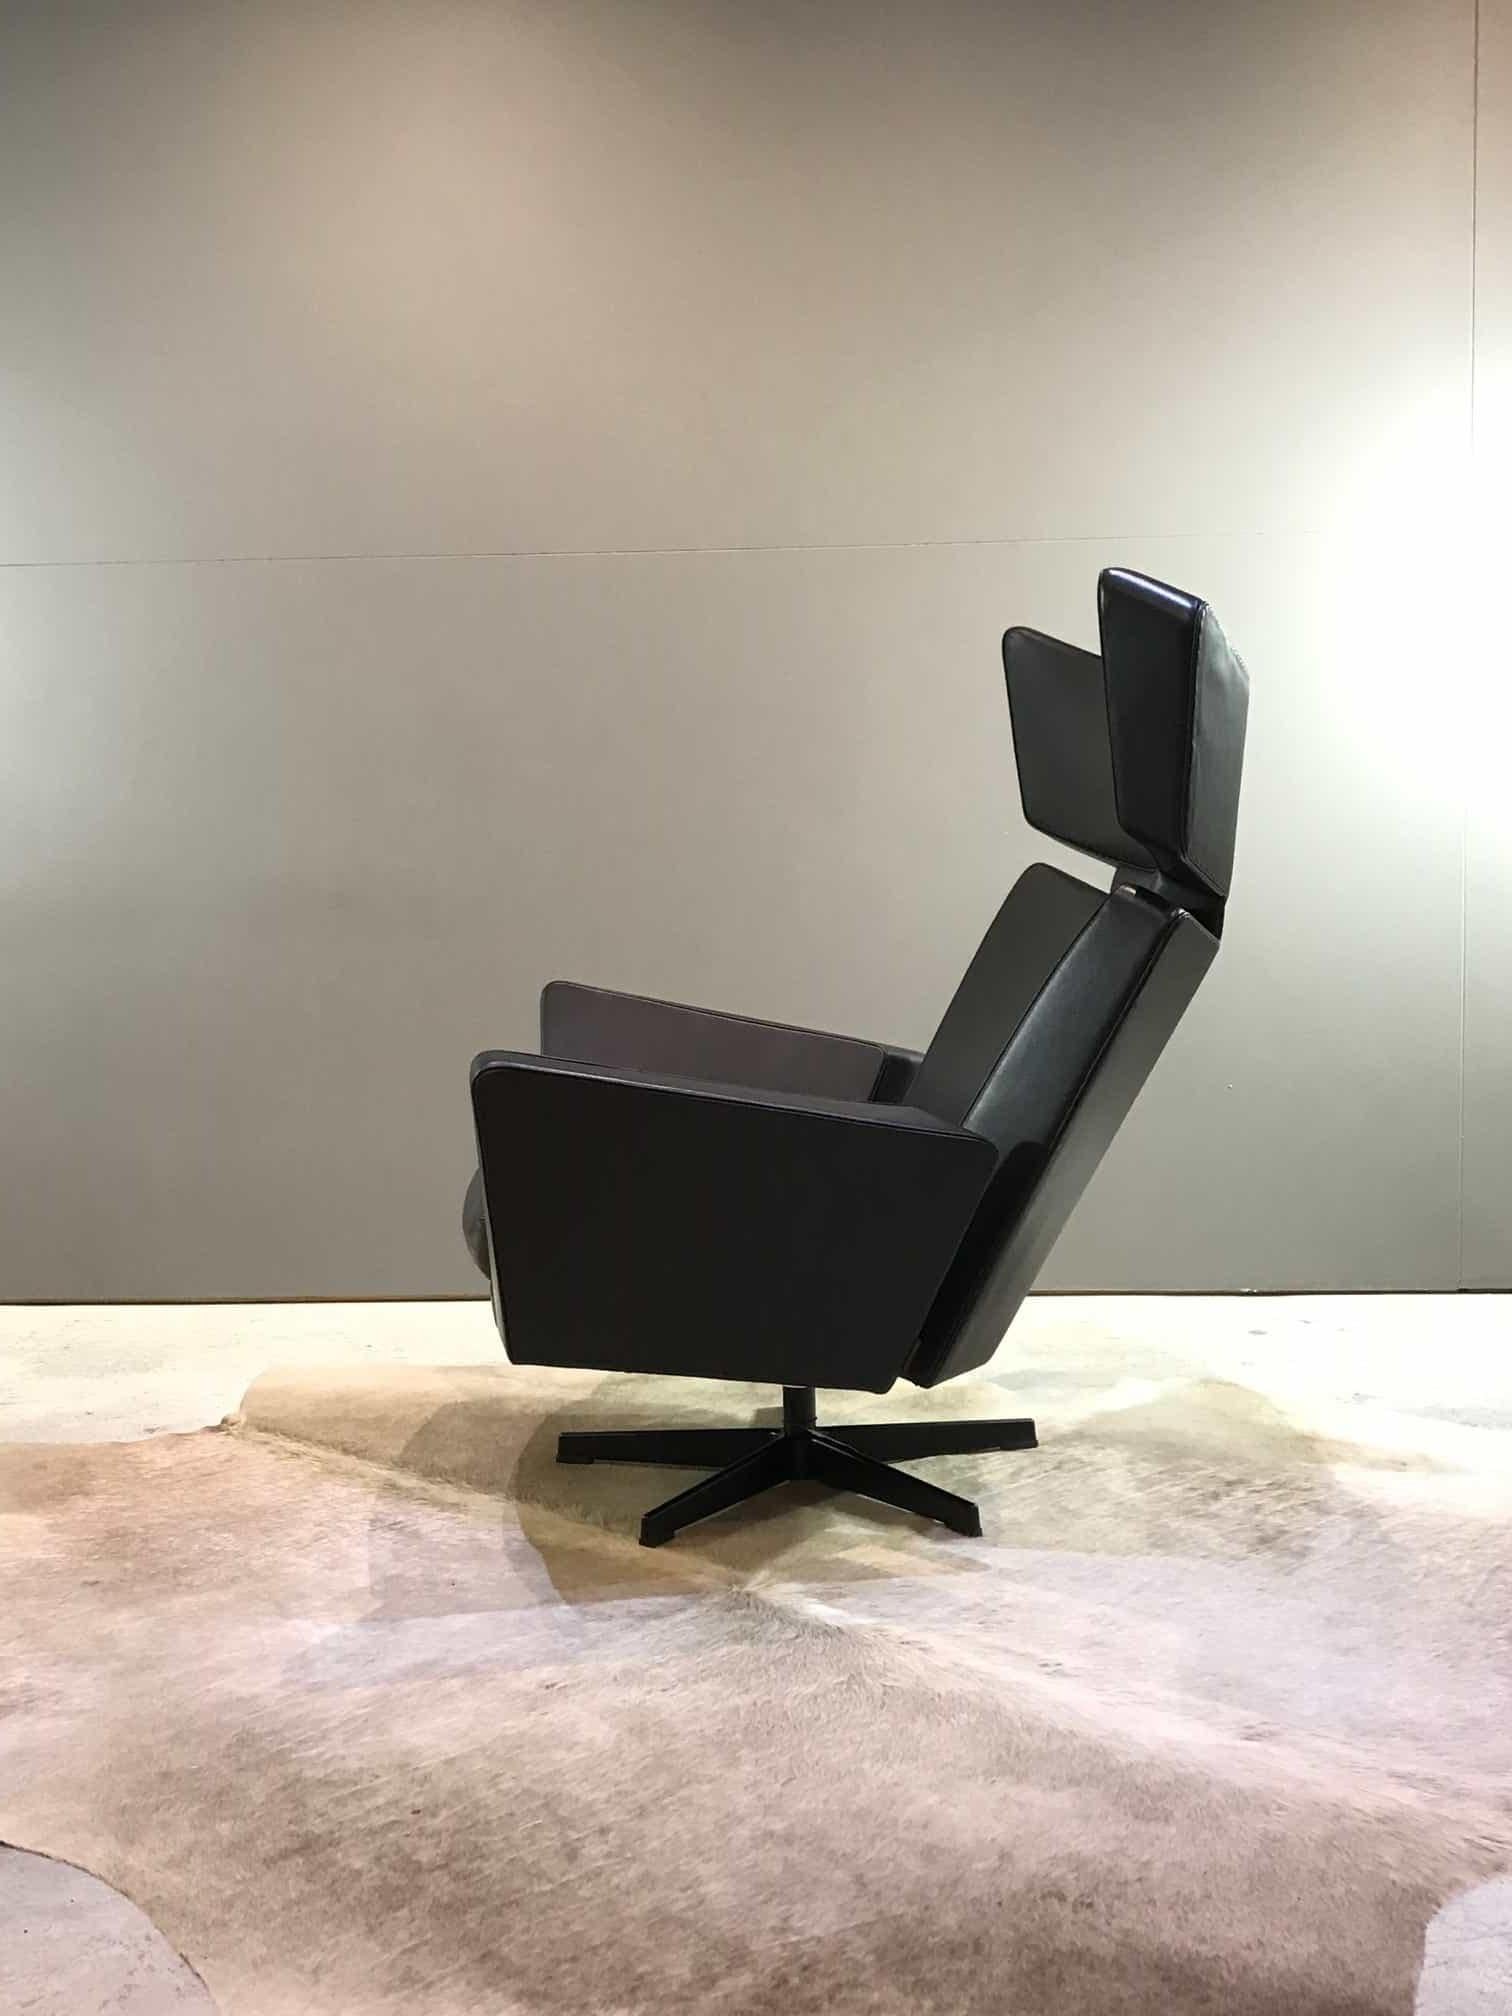 Danish Midcentury Black Leather Lounge Chair by Arne Jacobsen Oksen, Ox Chair For Sale